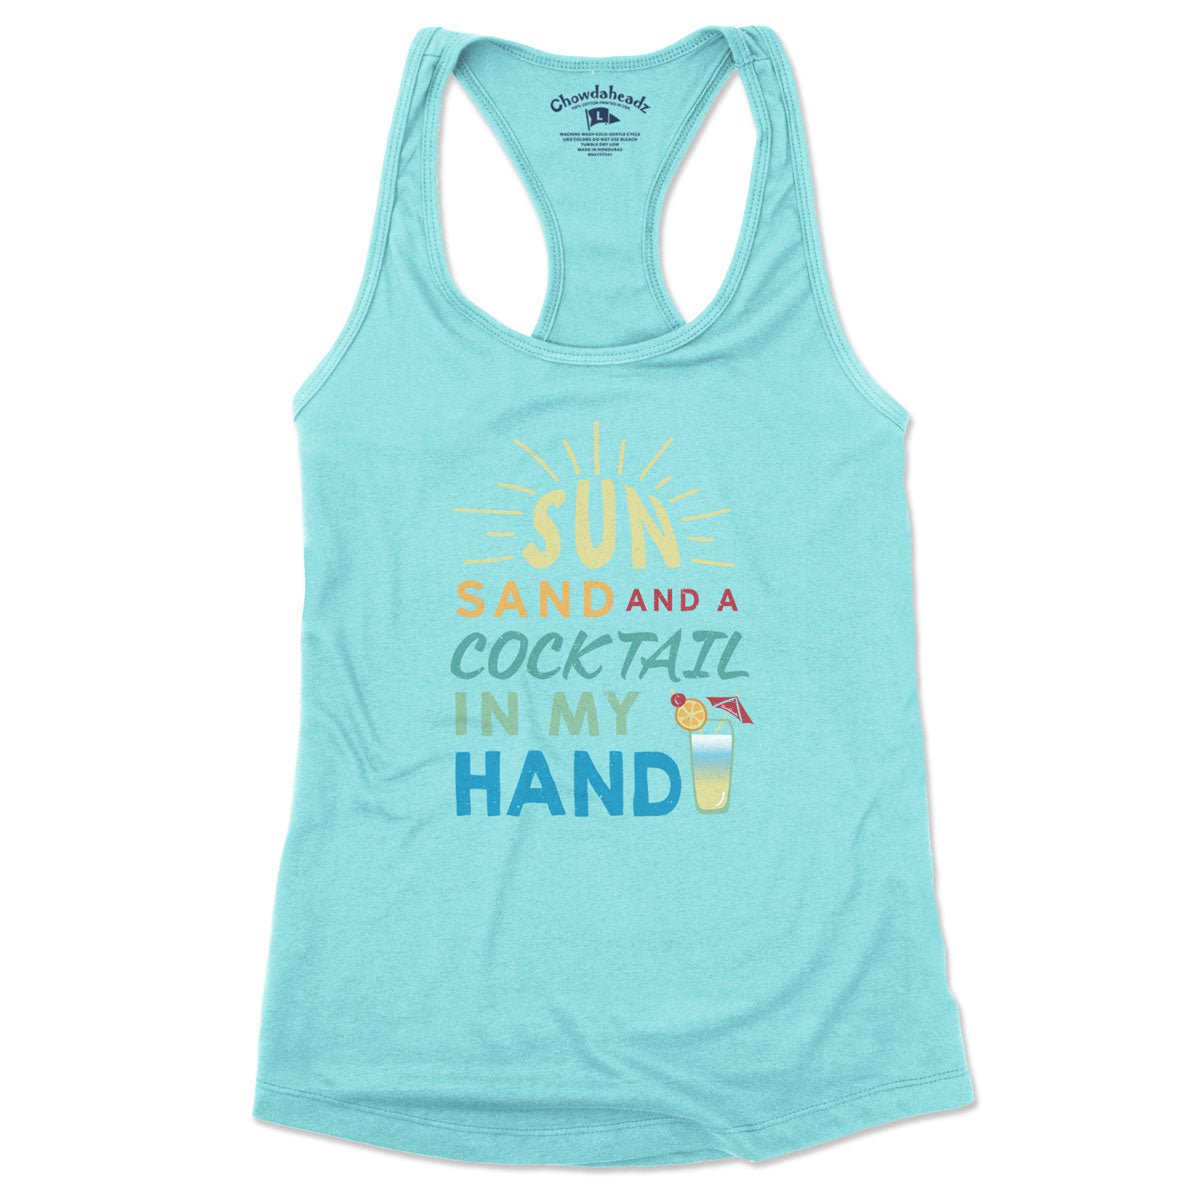 Sun, Sand & A Cocktail In My Hand Women's Tank Top (4 Colors) - Chowdaheadz